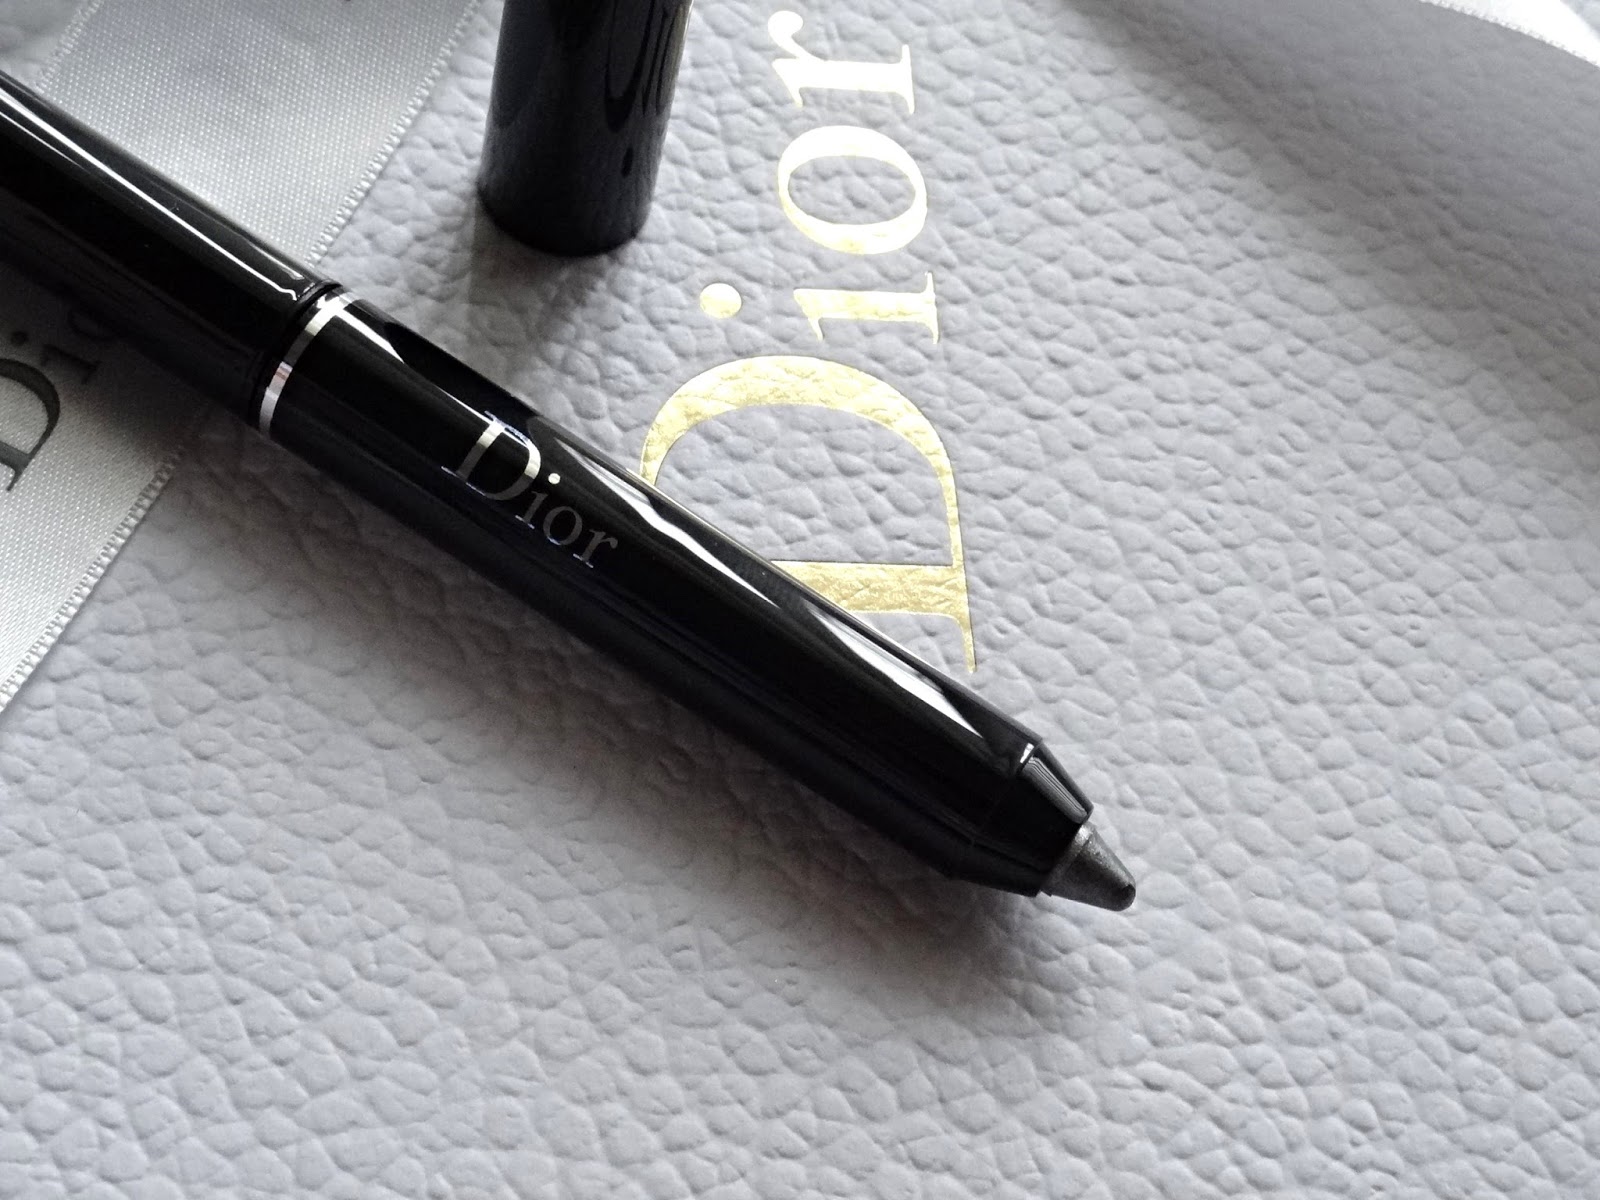 Dior Diorshow Kohl in Smokey Grey 079 Kingdom of Colors Spring 2015 Collection Review, Photos & Swatches